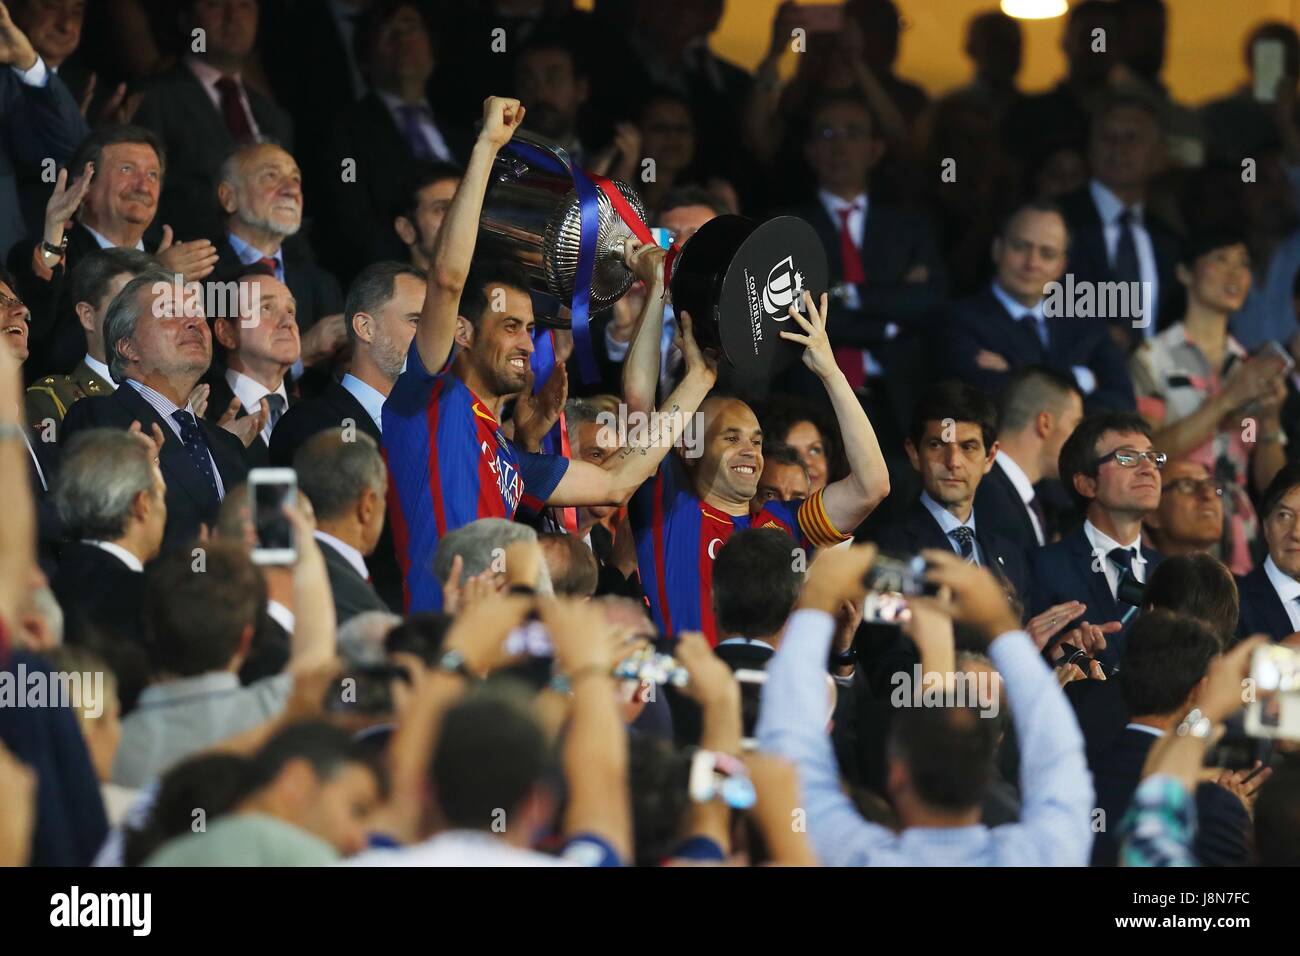 Madrid, Spain. 27th May, 2017. (L-R) Sergio Busquets, Andres Iniesta (Barcelona) Football/Soccer : Busquets and Iniesta celebrate after winning Spanish 'Copa del Rey' match between Deportivo Alaves 1-3 FC Barcelona at the Vicente Calderon stadium in Madrid, Spain . Credit: Mutsu Kawamori/AFLO/Alamy Live News Stock Photo